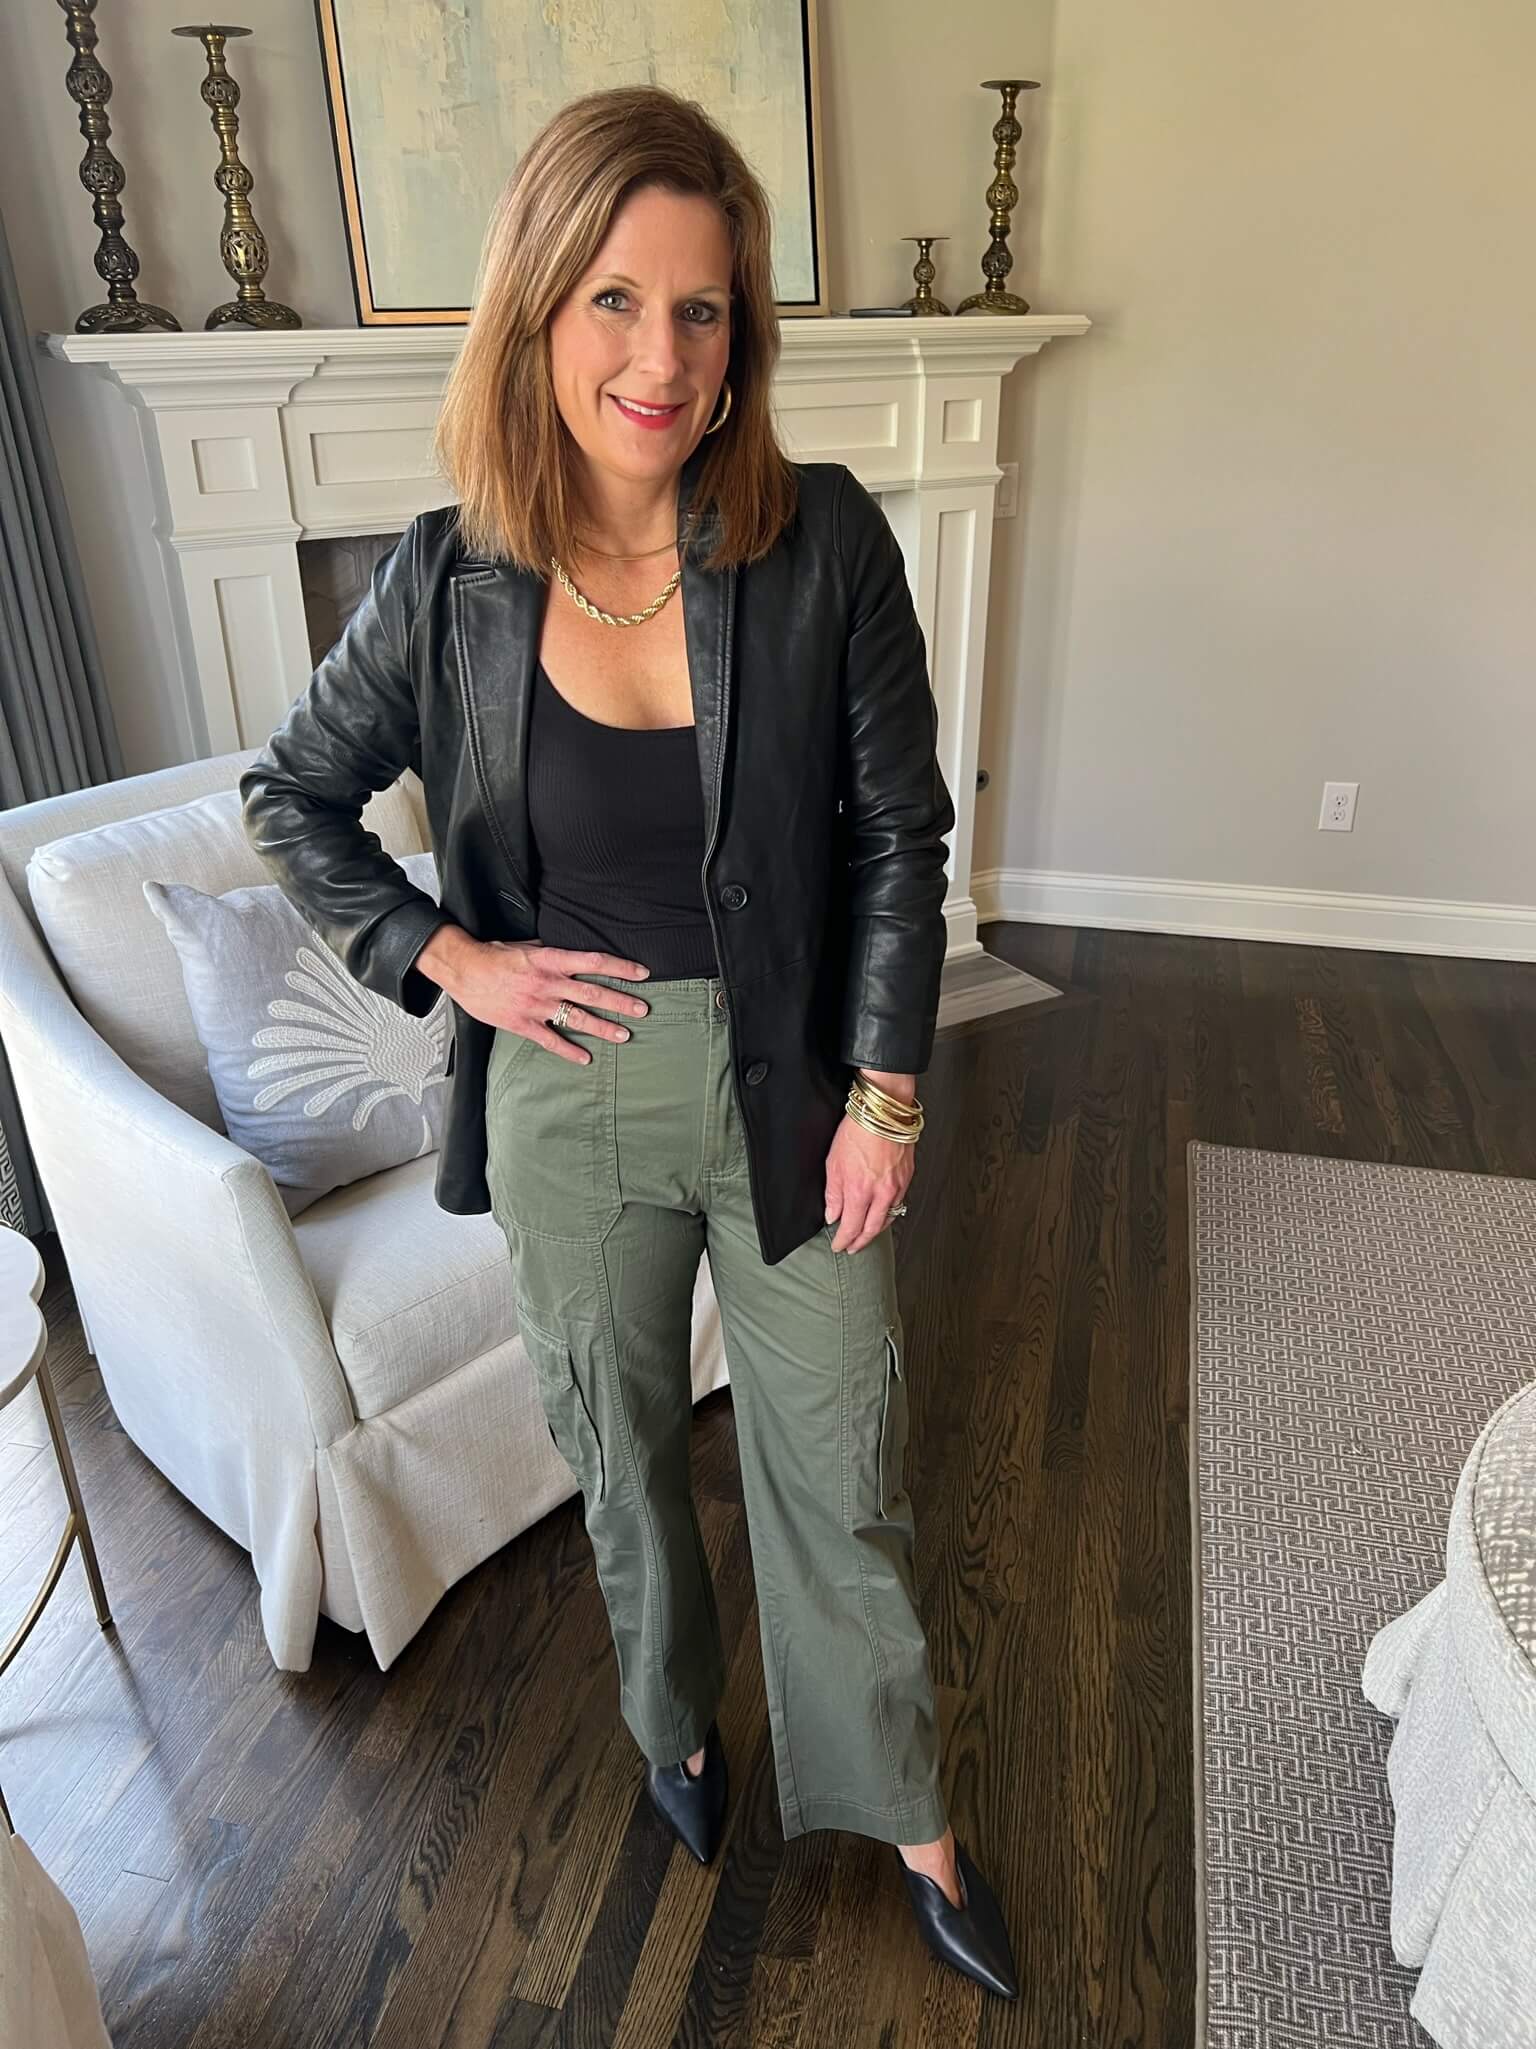 3 Ways To Style Cargo Pants Leather Blazer And Cargo Pants how to style a blazer with utility pants how to style your leather blazer how to wear heels with cargo pants how to dress up your cargo pants